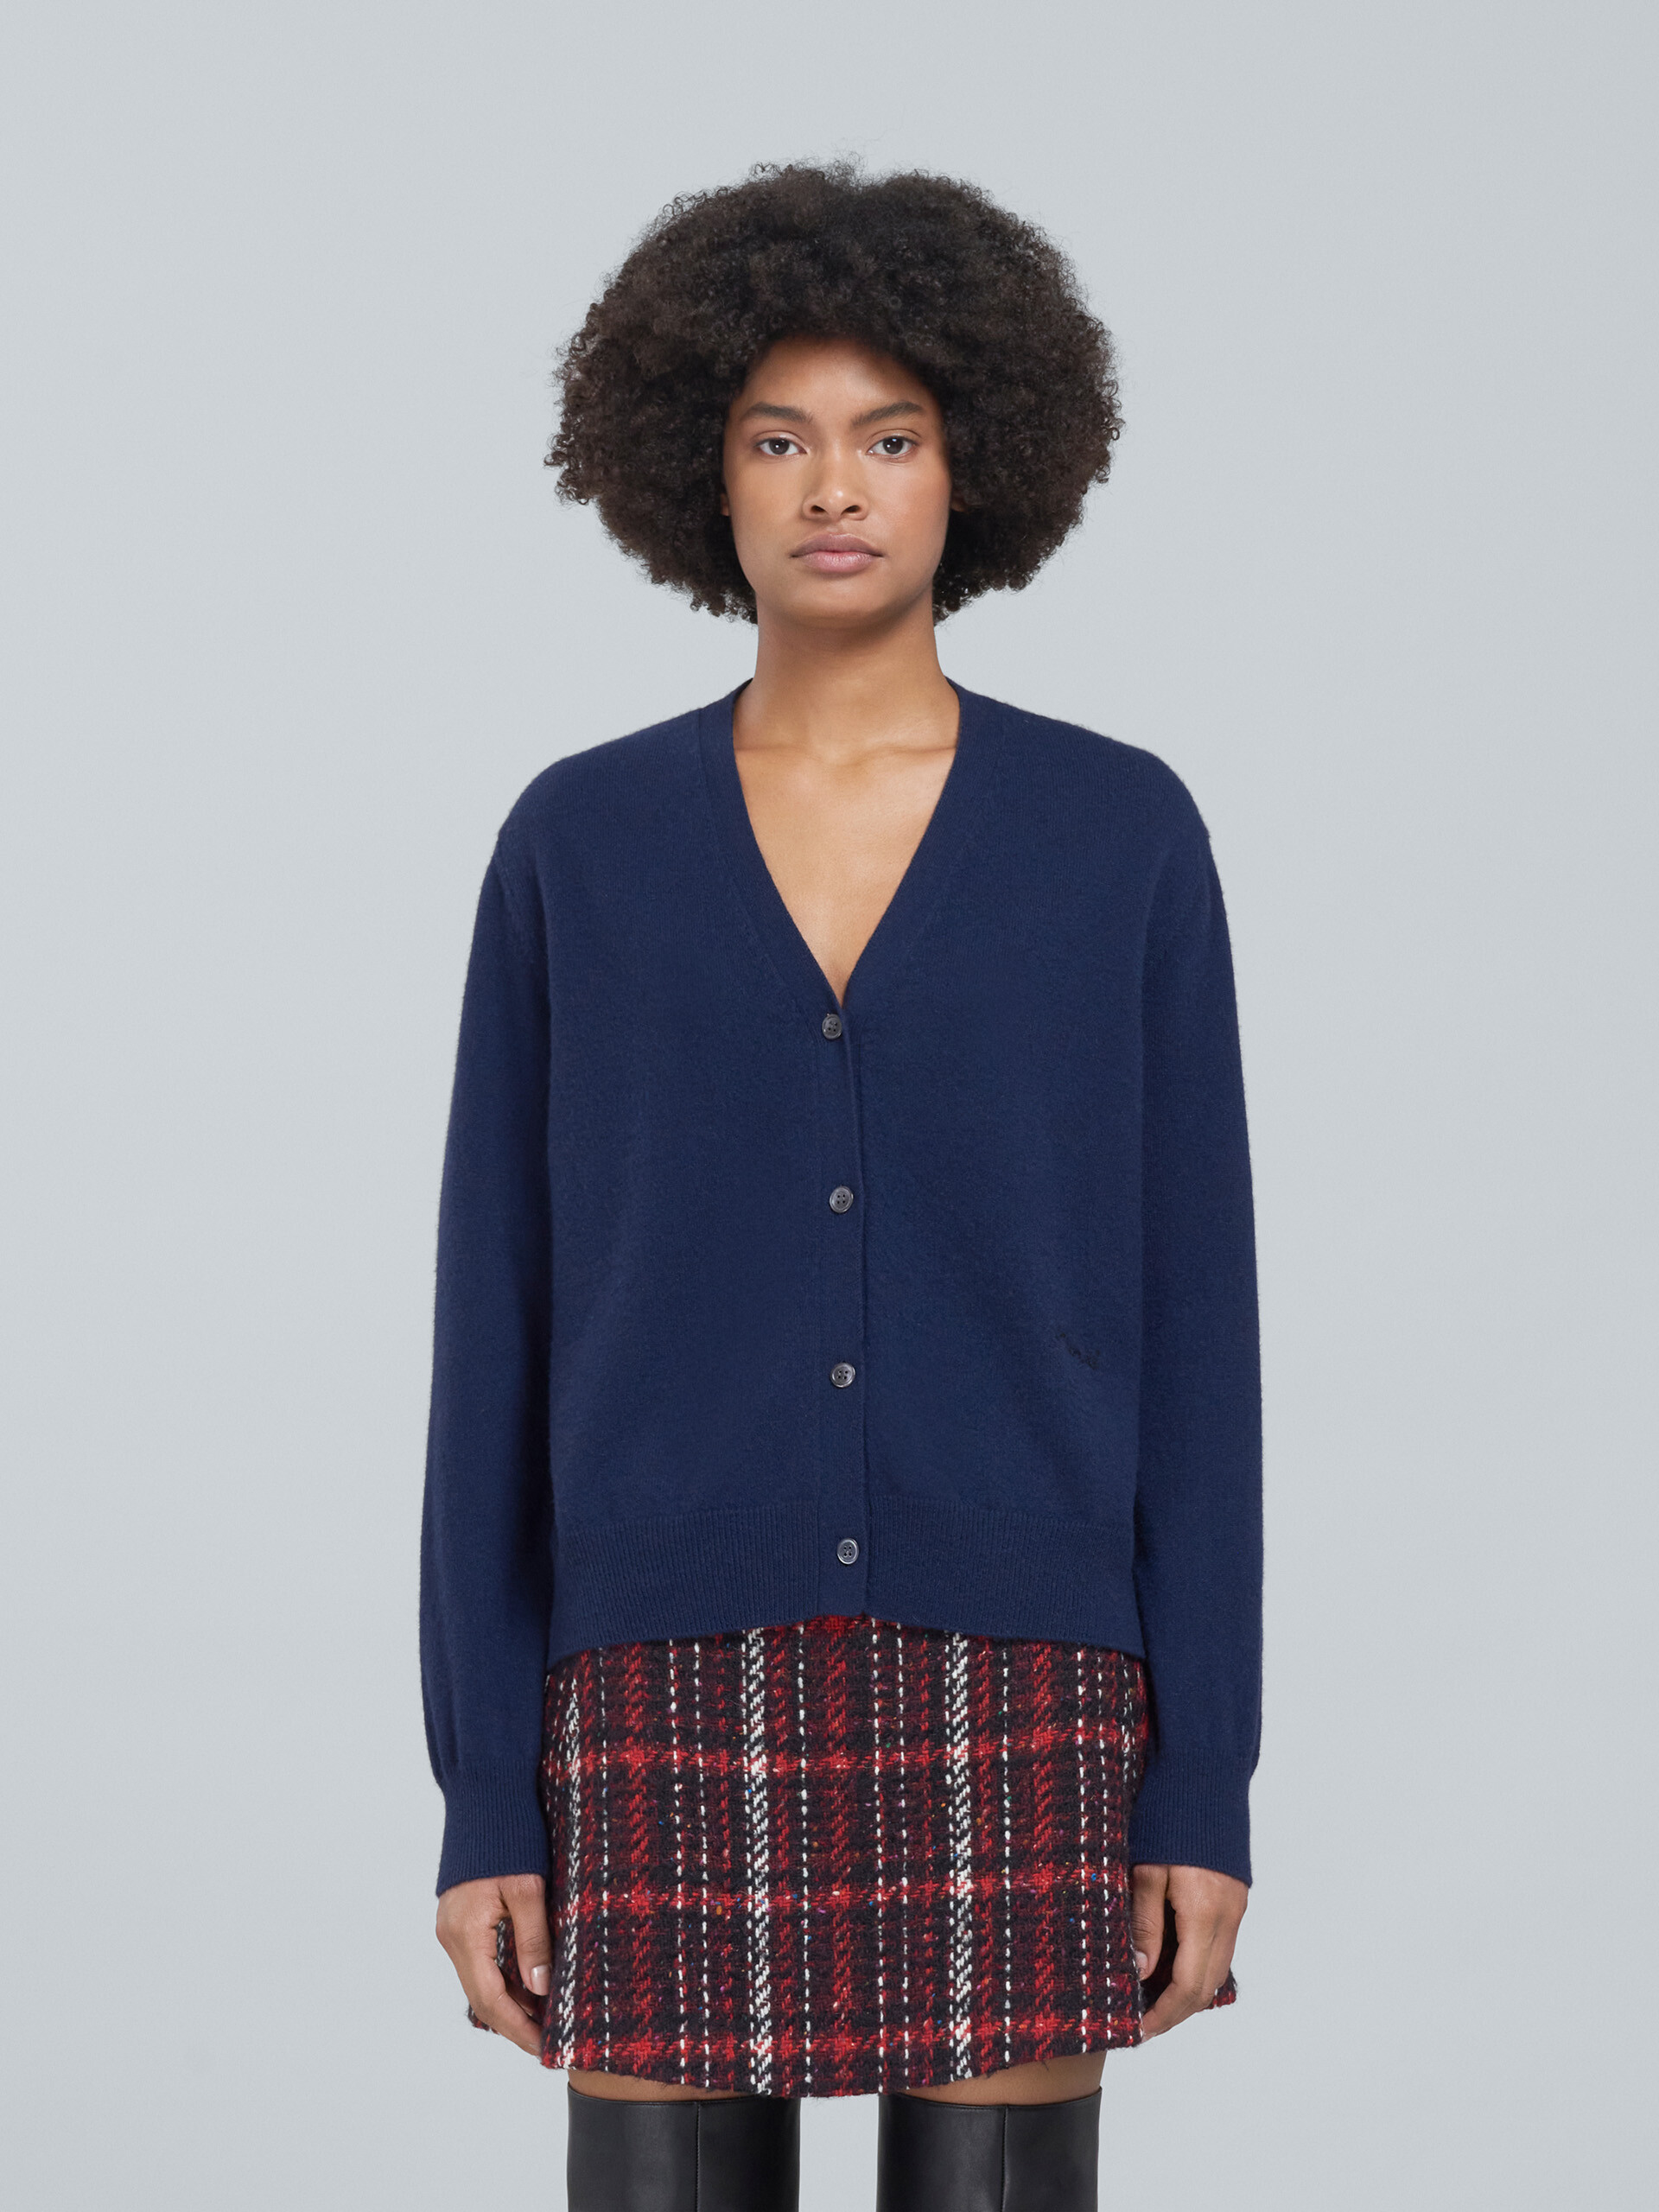 Cashmere cardigan - Pullovers - Image 2